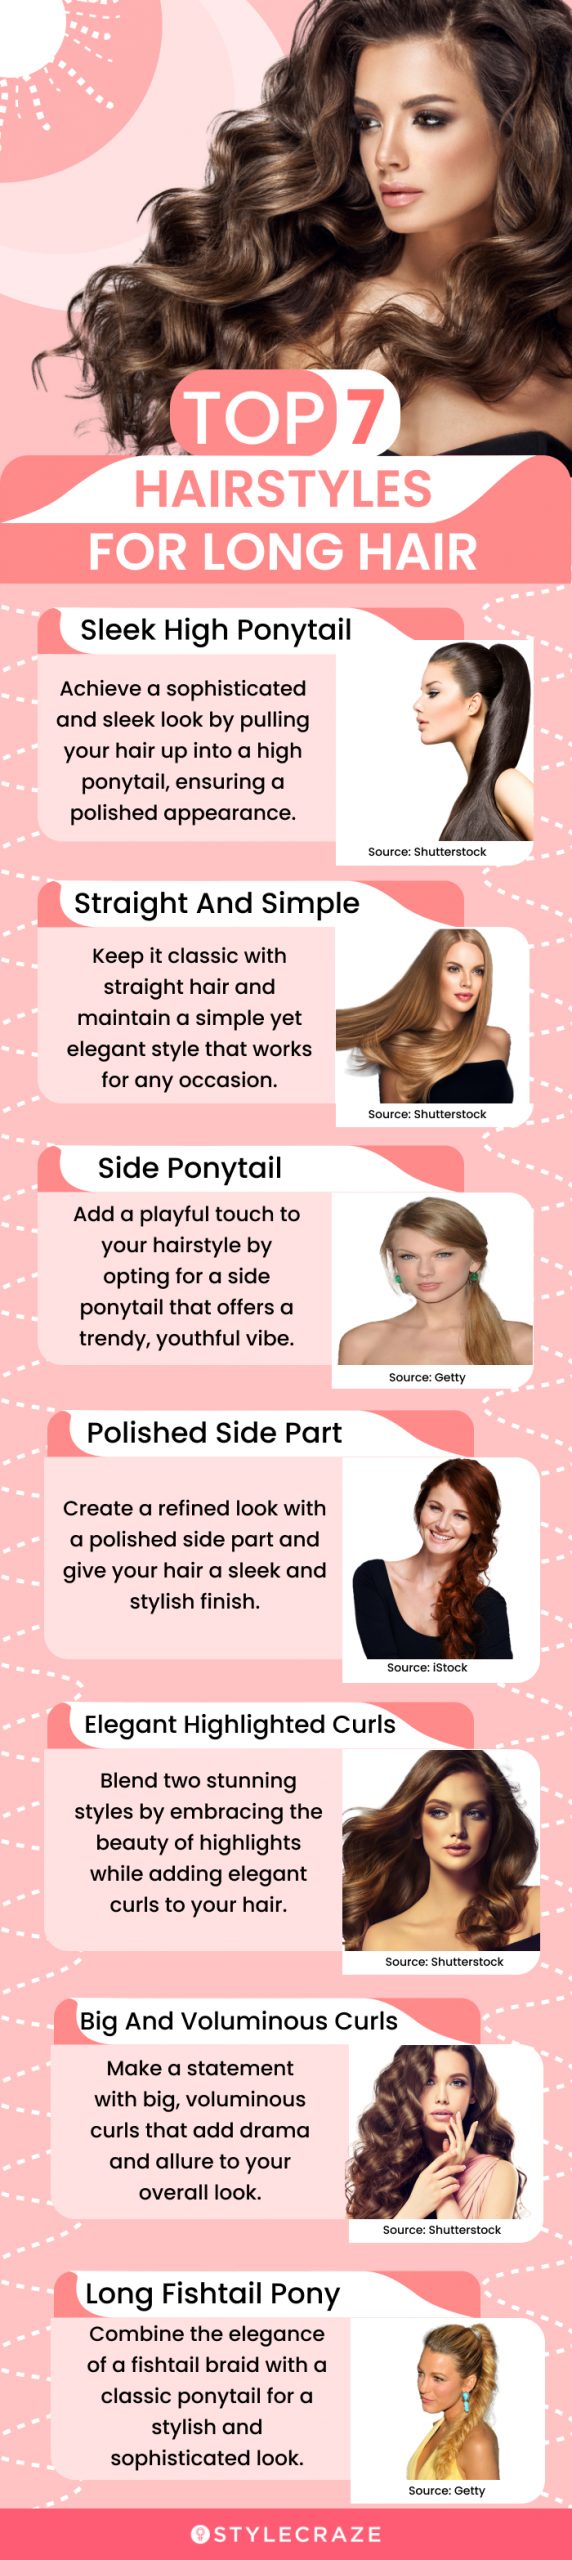 top 7 hairstyles for long hair (infographic)